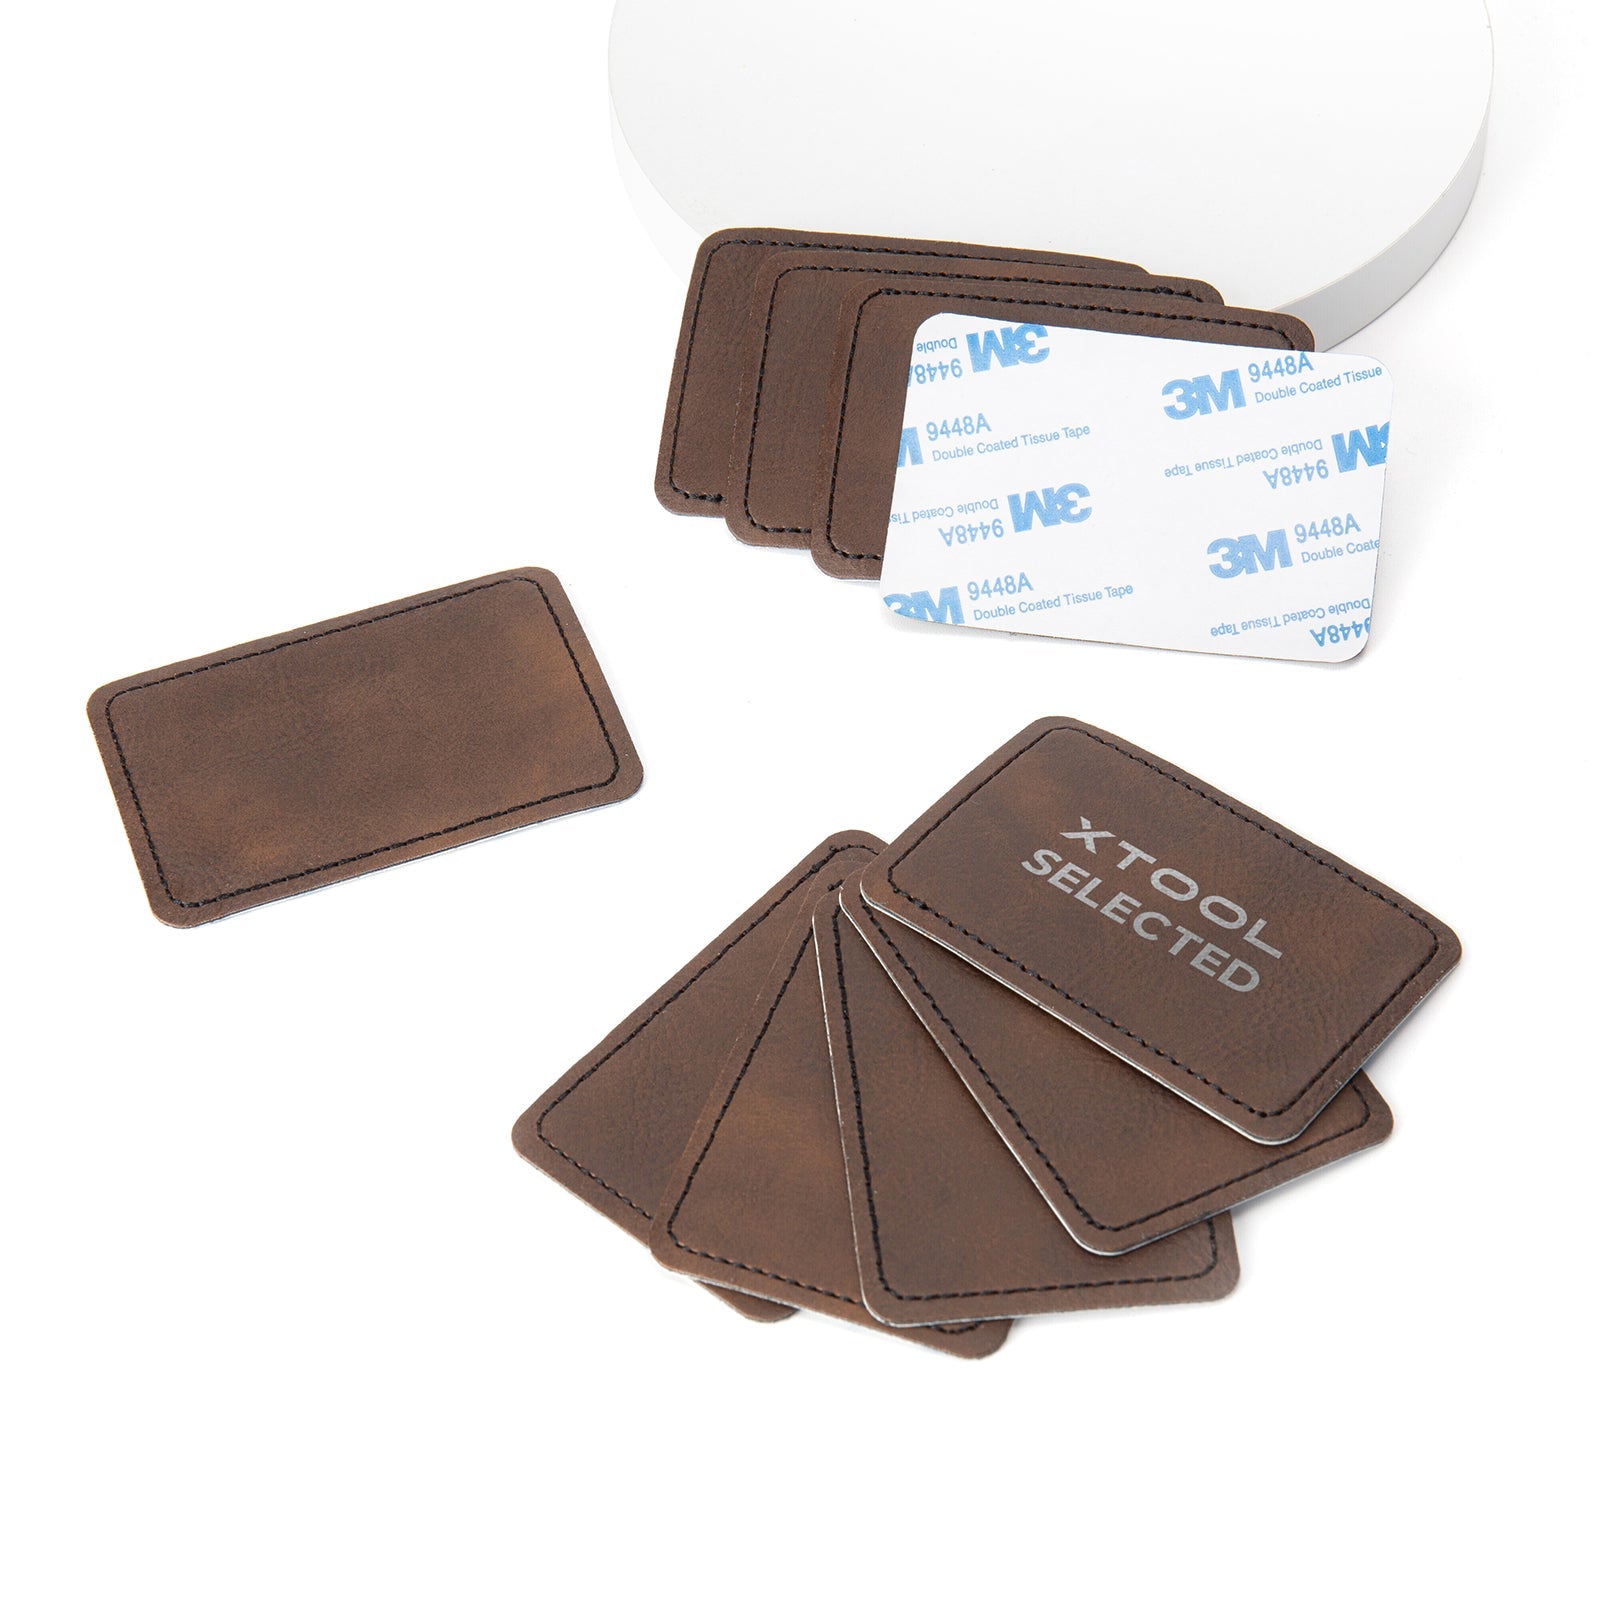 Brown to Silver Laserable PU Rectangular Patch (10pcs)